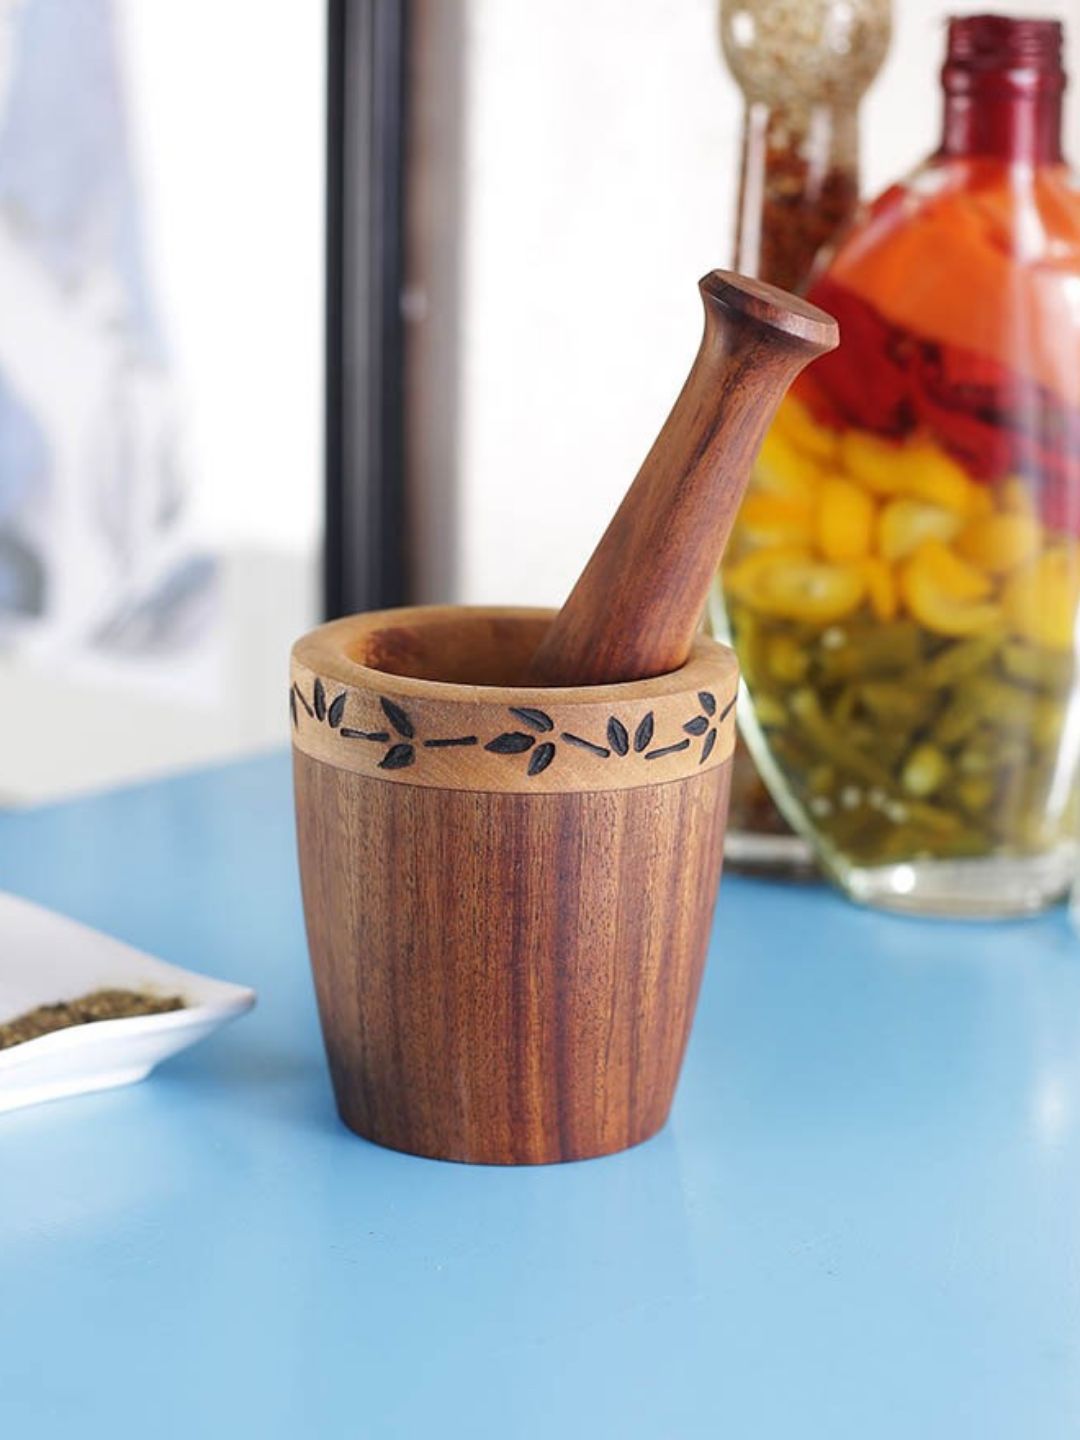 Unravel India Wooden Brown Spice Mortar and Pestle Price in India